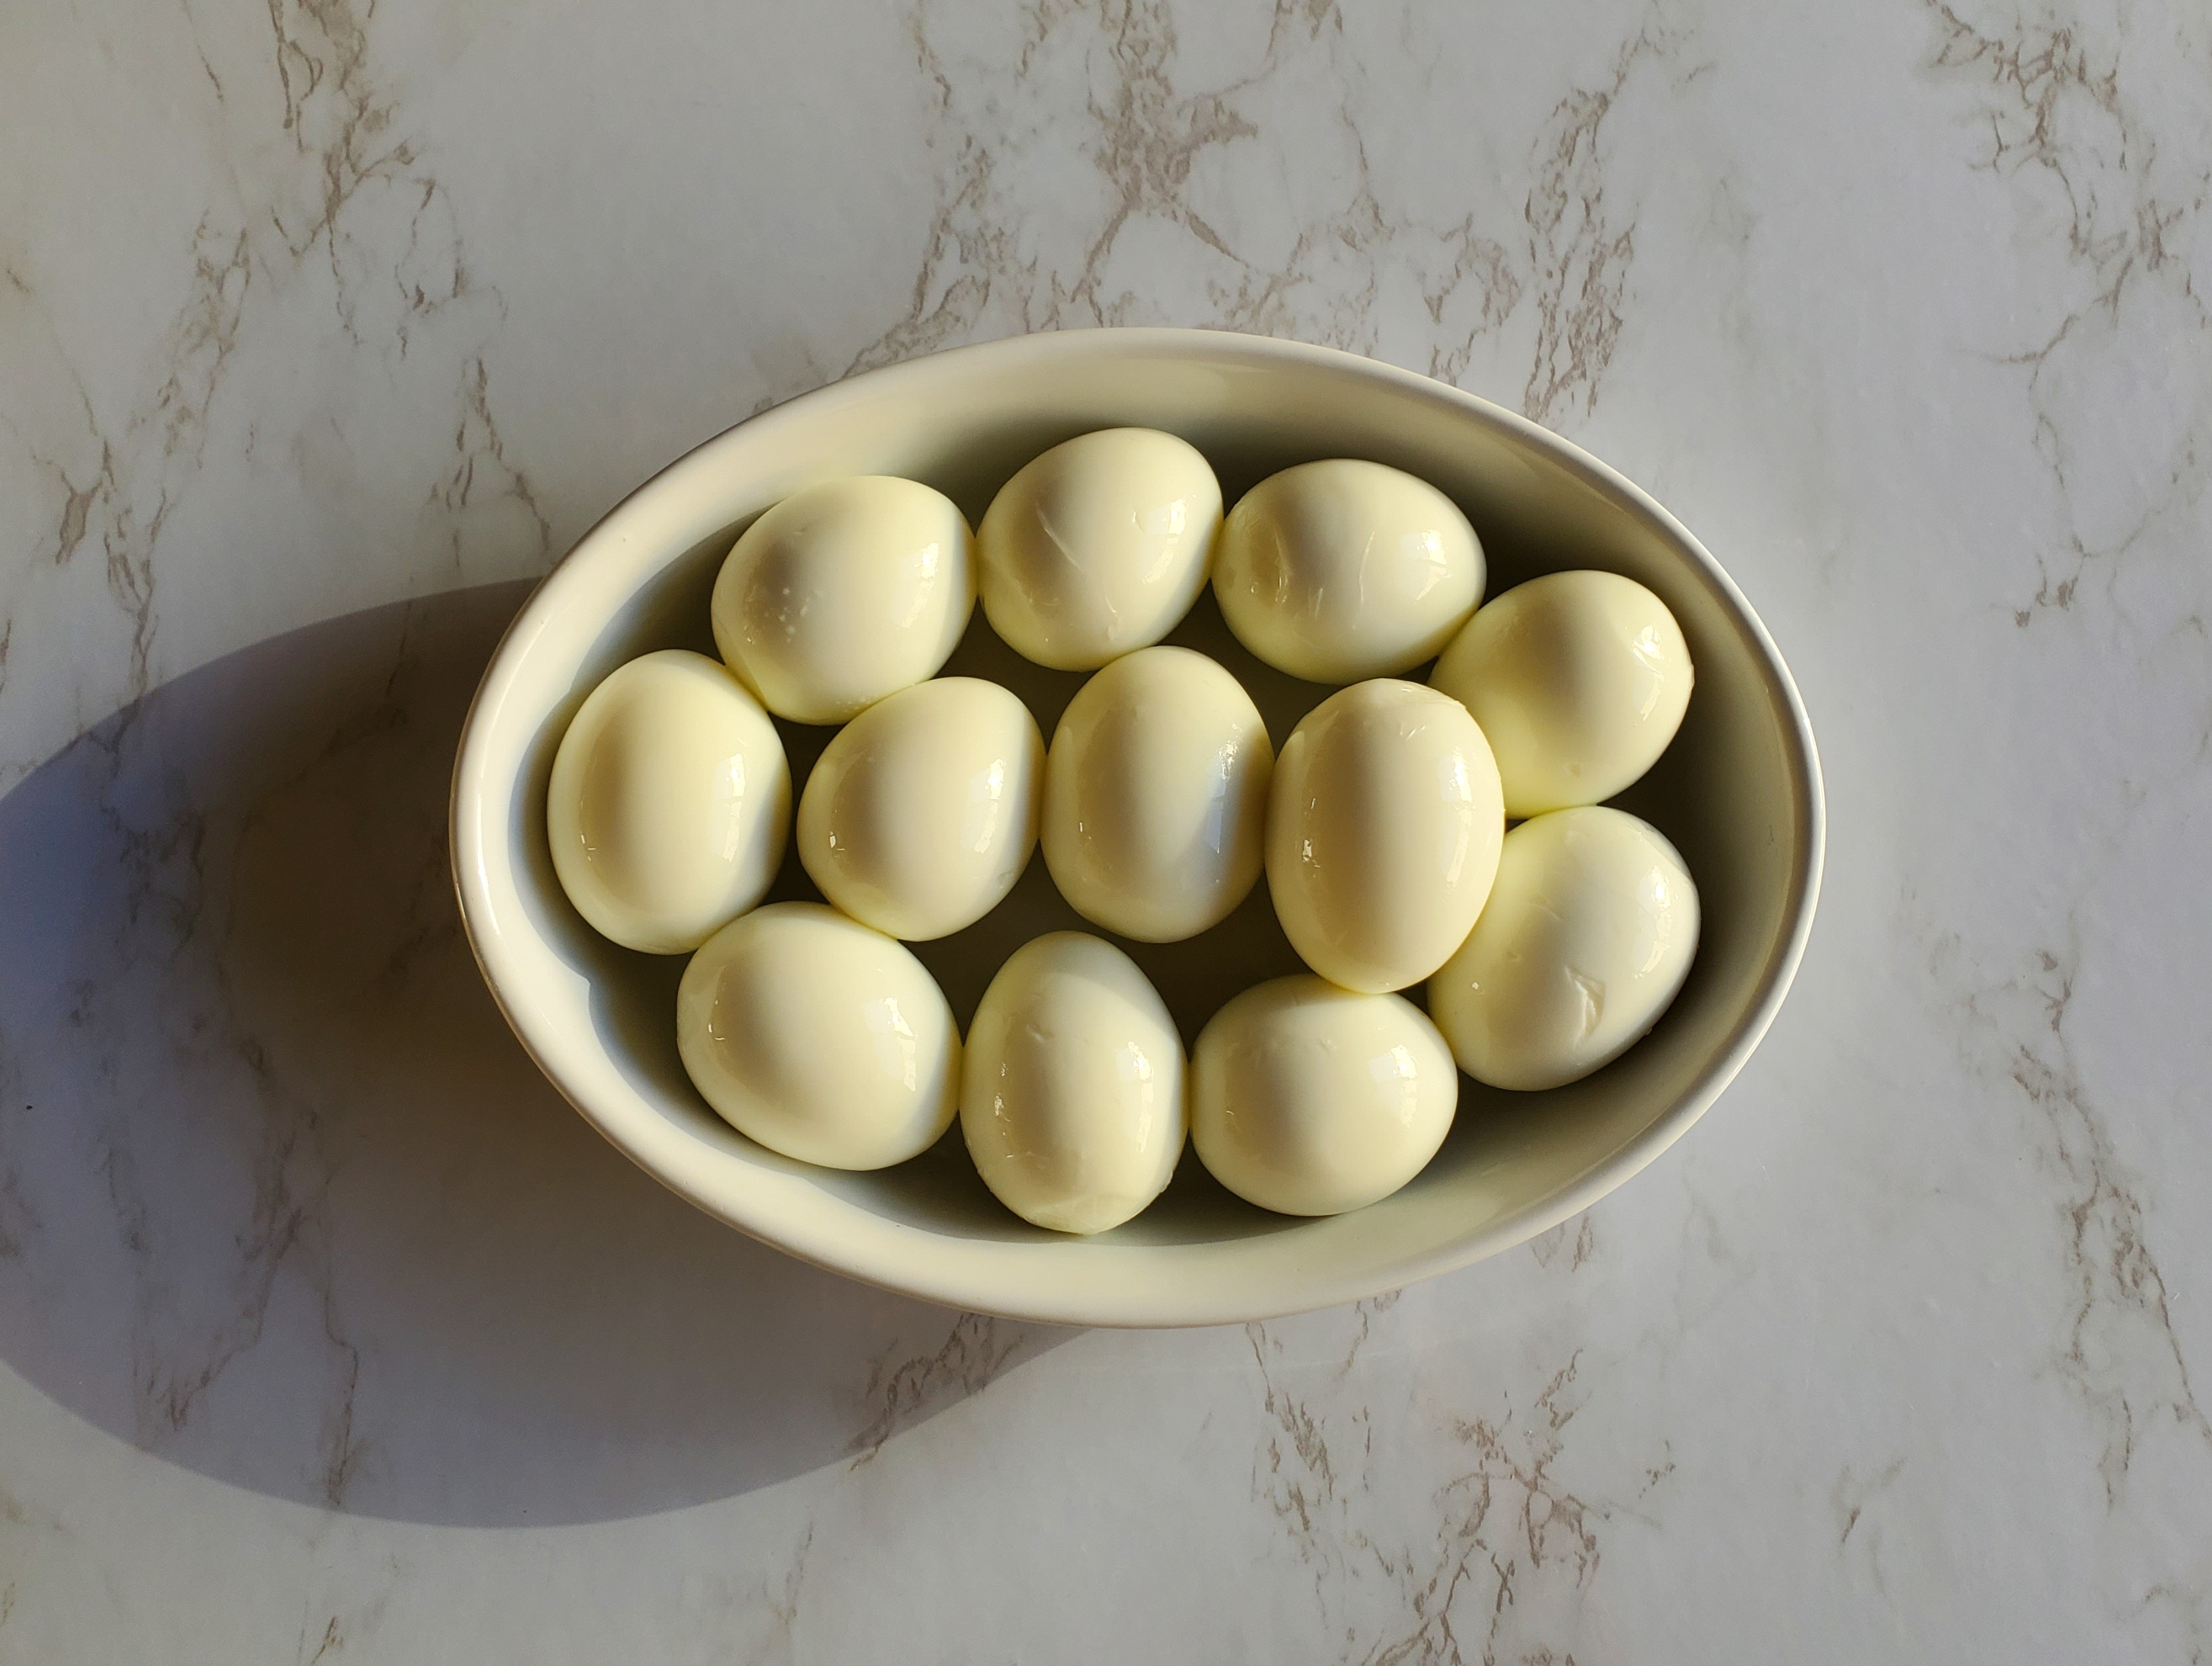 A white oval ceramic platter on a marble counter top filled with hard boiled eggs.